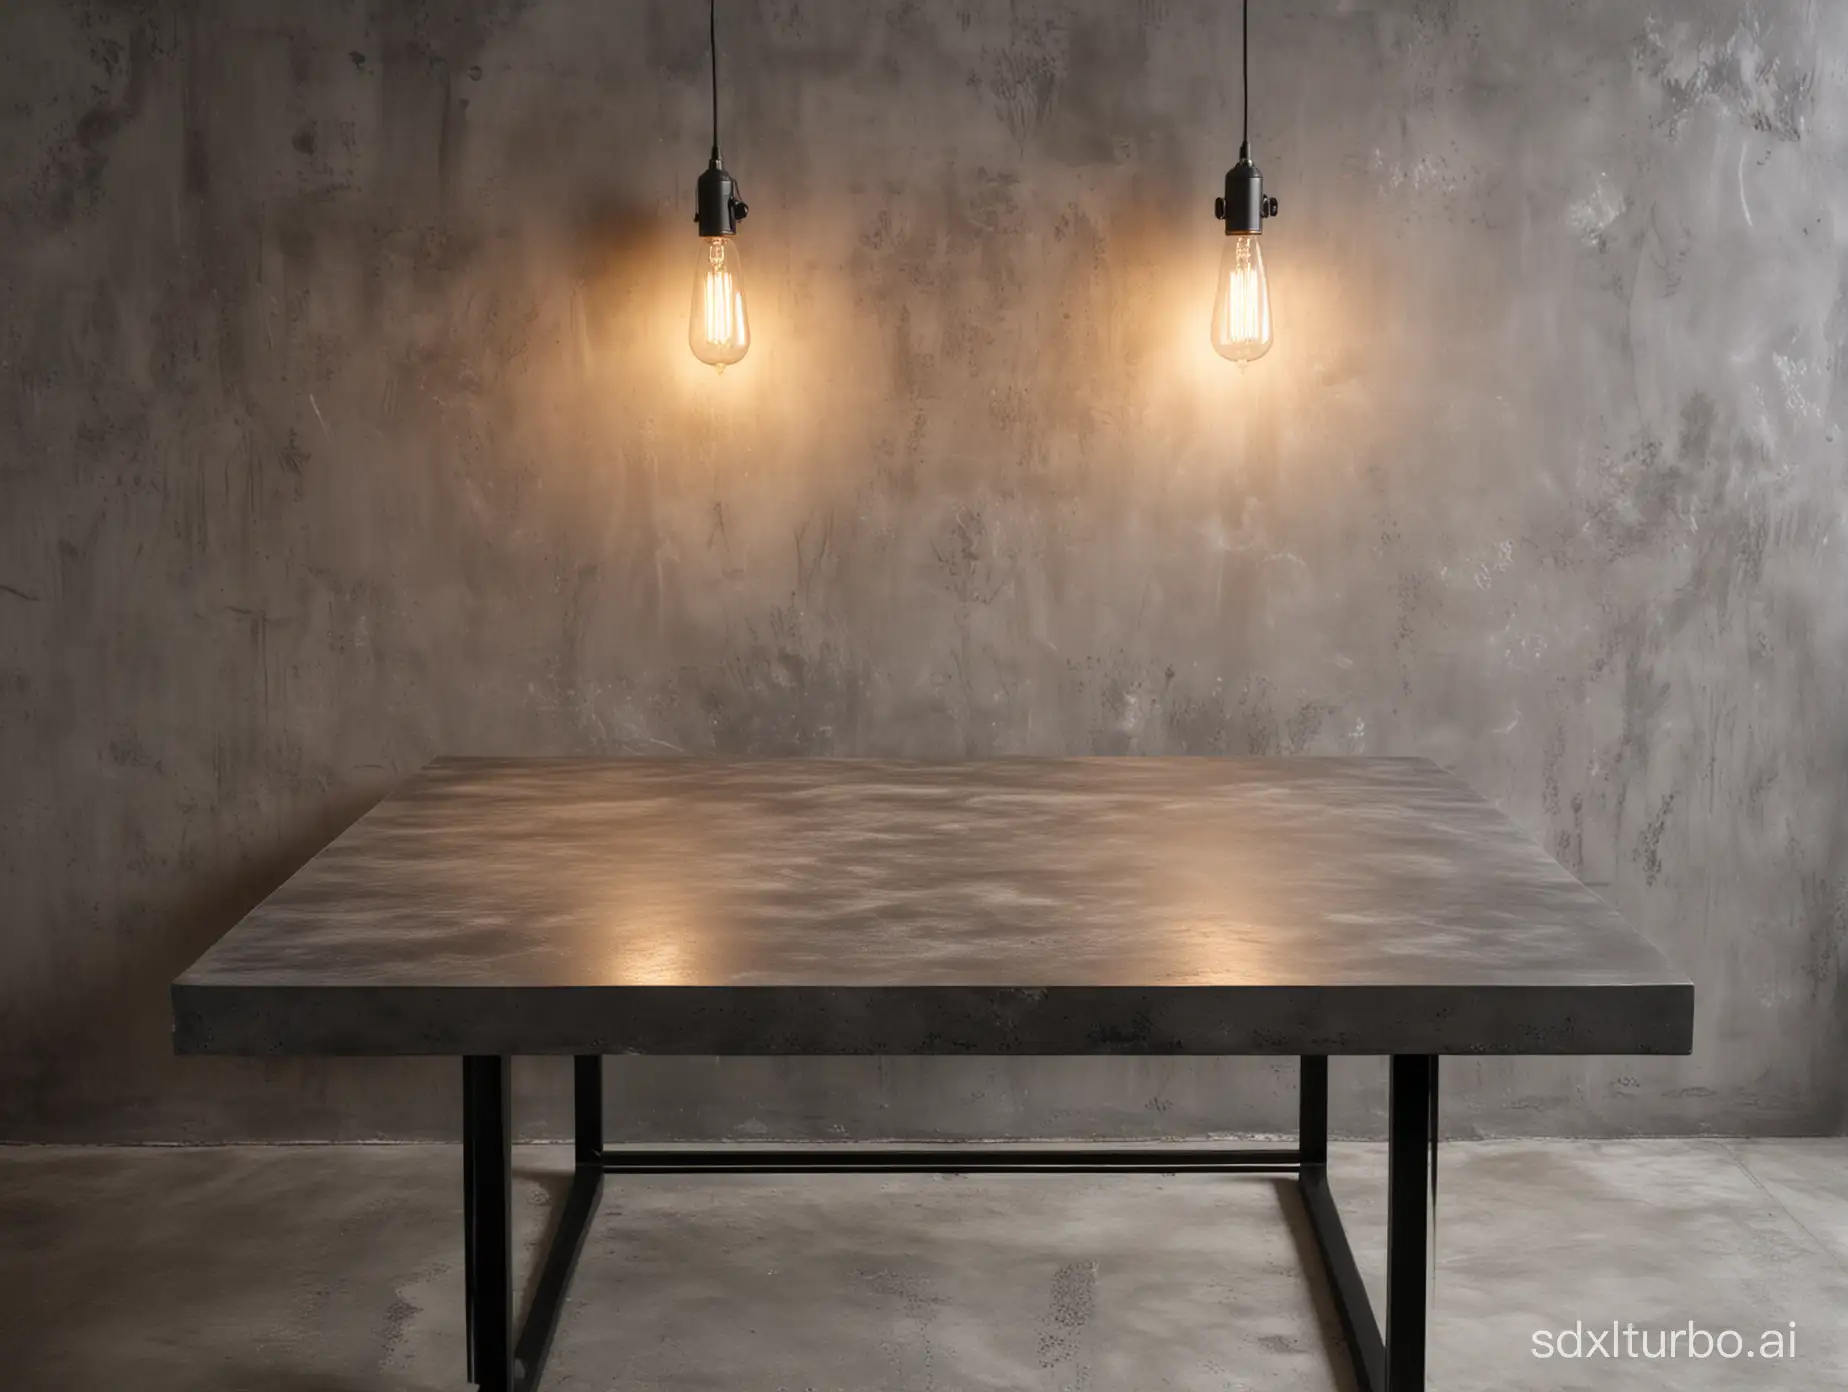 Stylish-Gray-Table-and-Black-Counter-with-WellLit-Burnt-Cement-Background